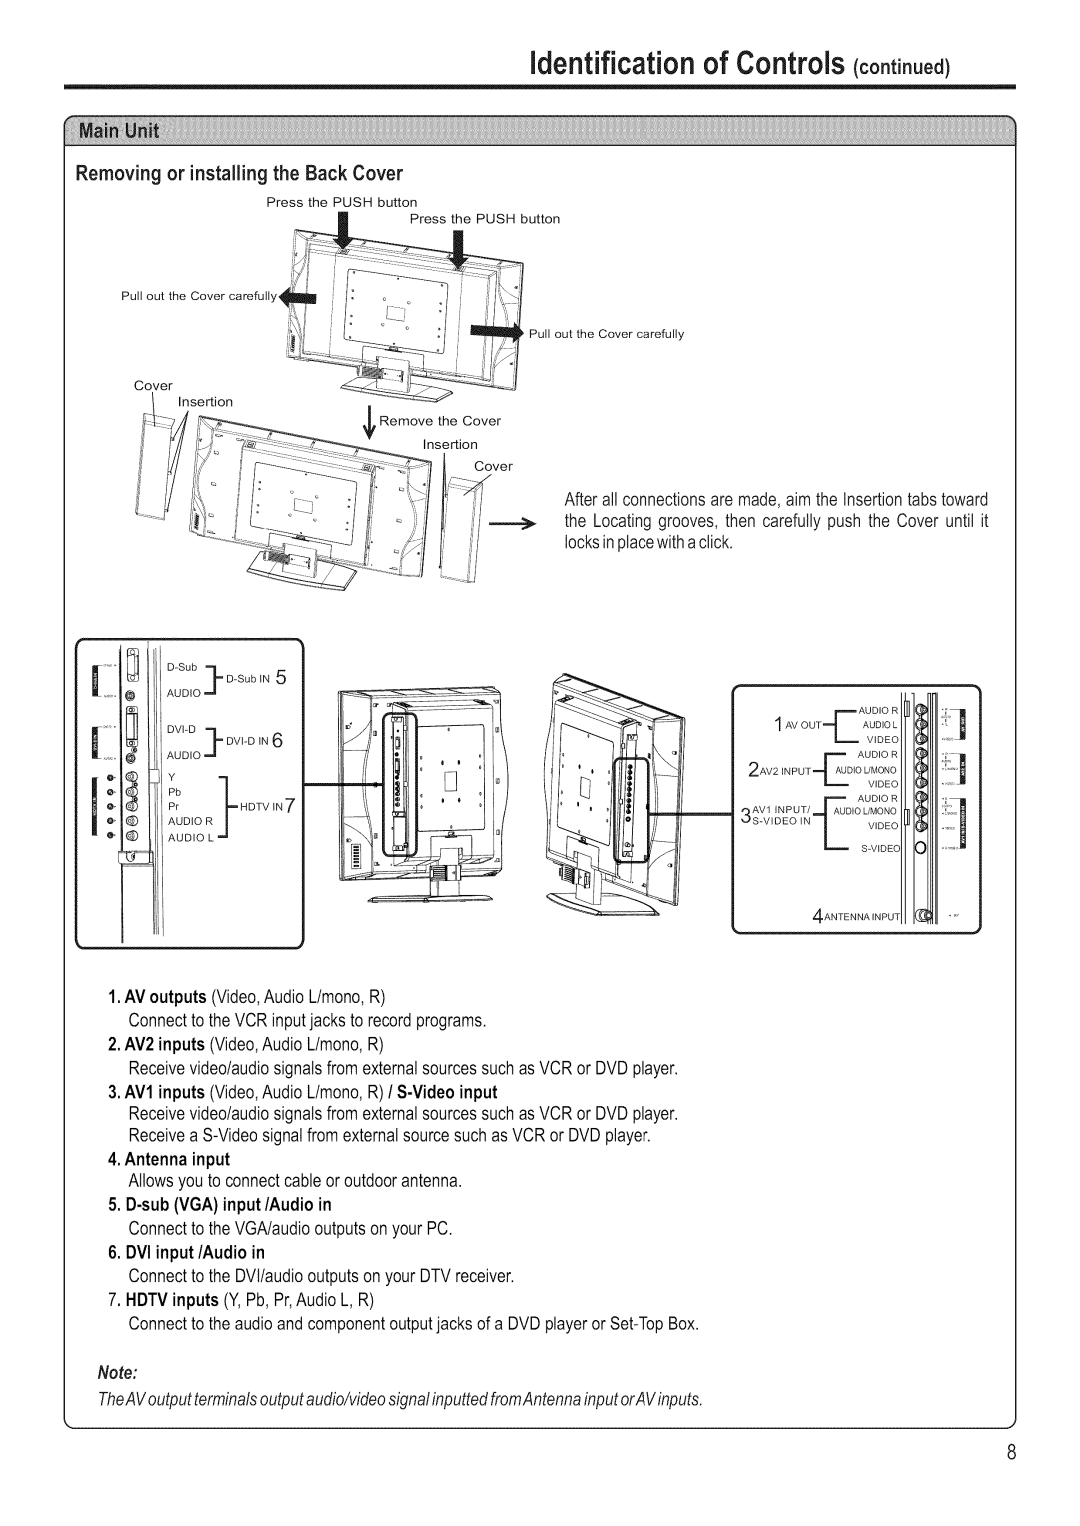 Polaroid FLM-3201 manual identificationof Controlscont noe¢, Removing or installing the Back Cover, R Bi 